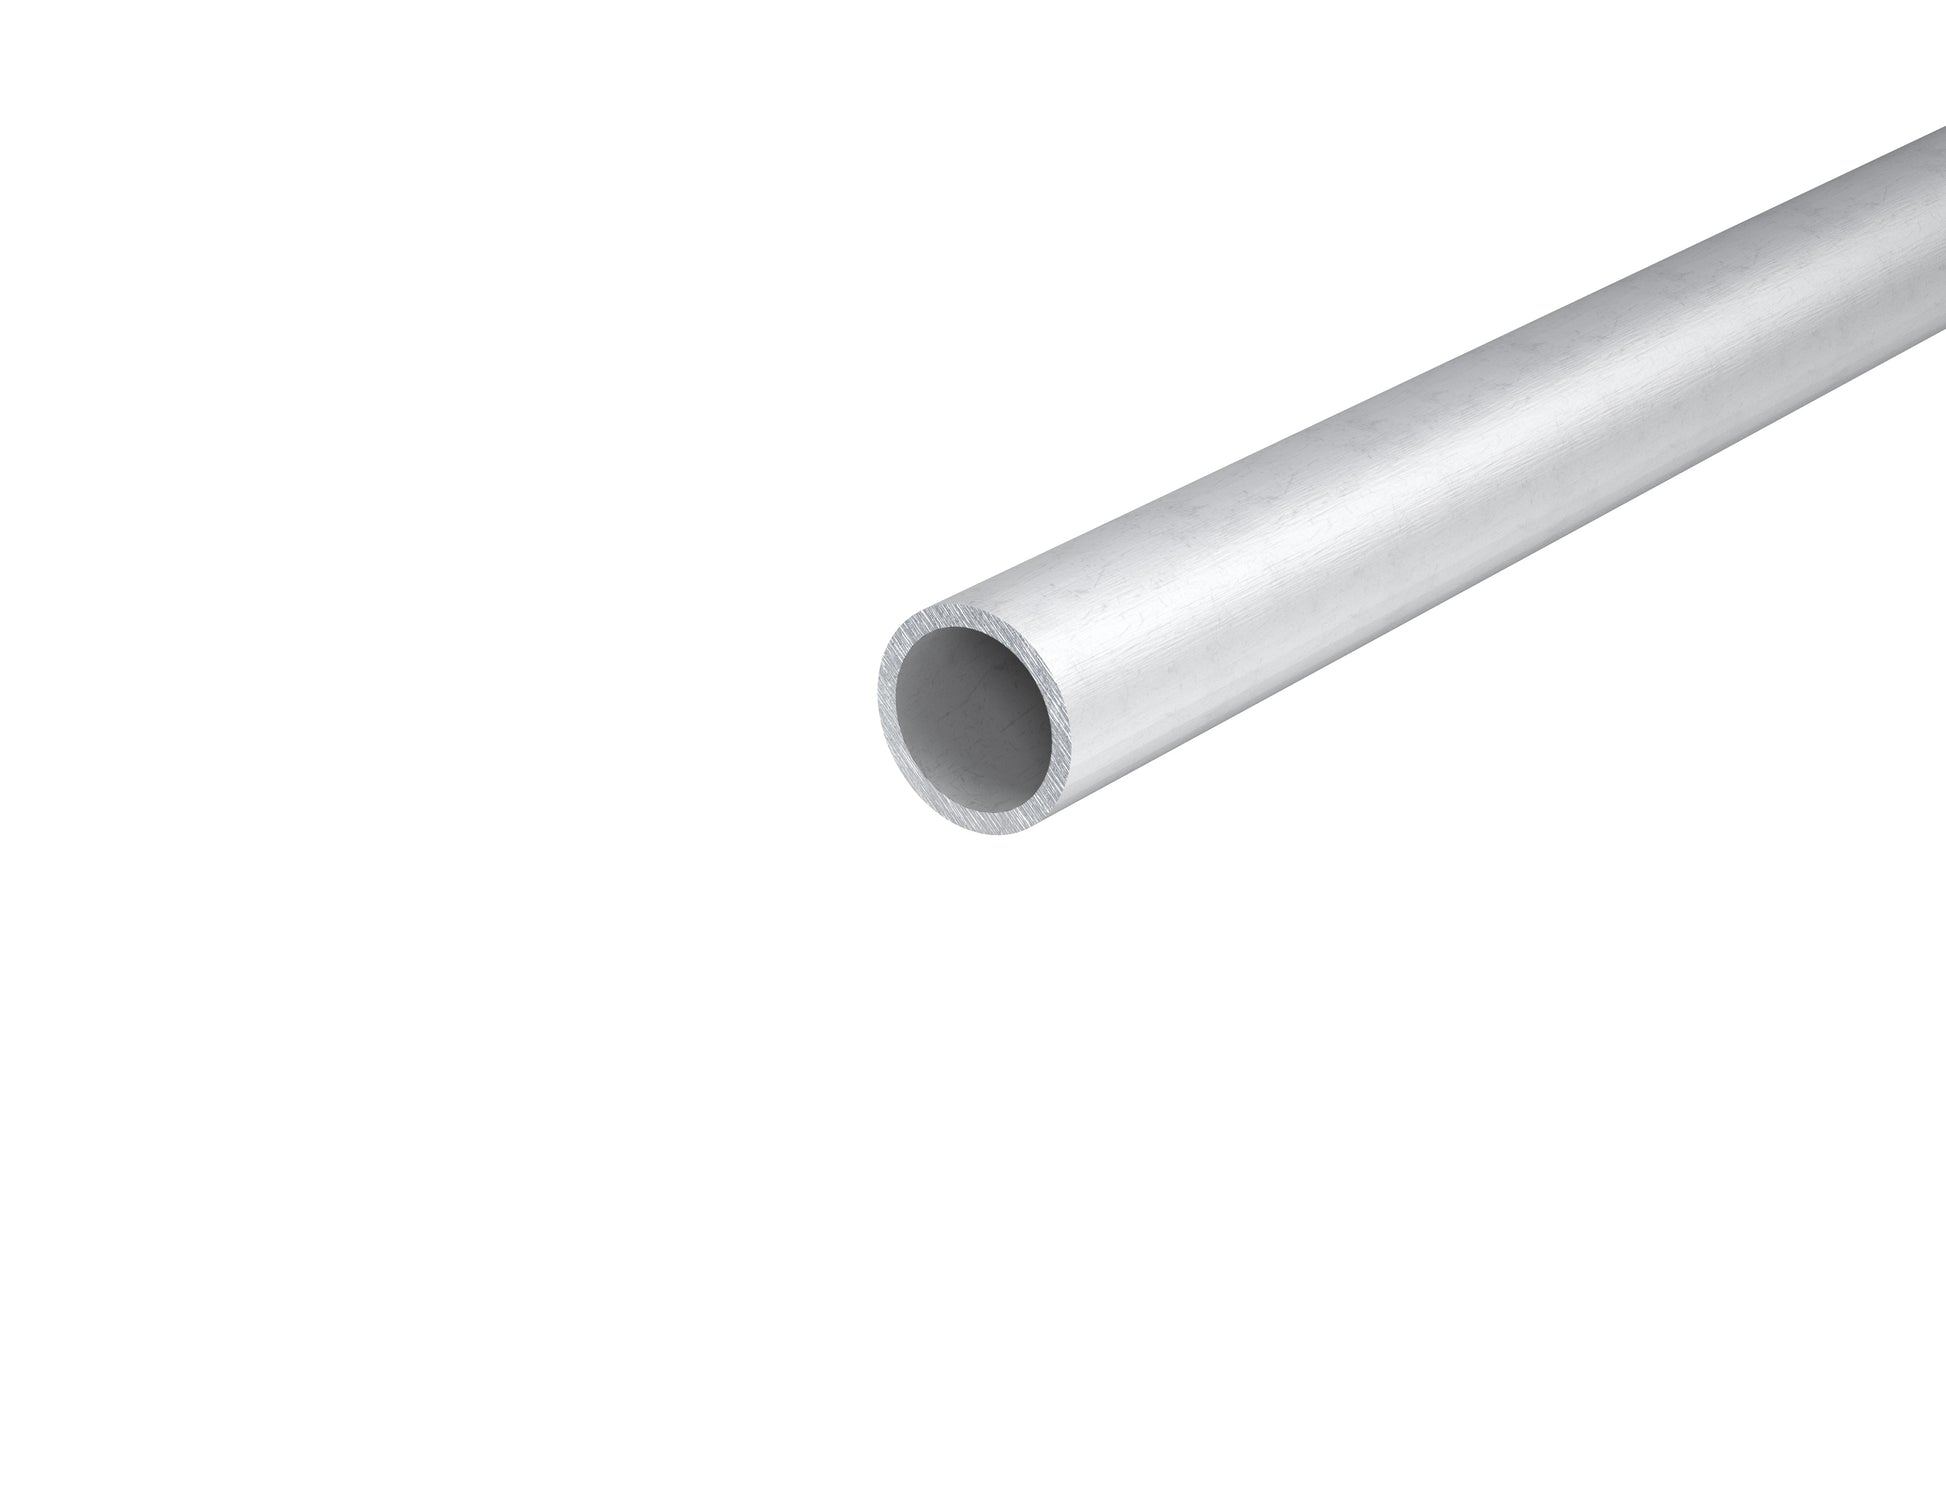 1.397" OD x 0.136" Wall Extruded Round Aluminum Tube 6063-T5 1.4" OD or over 1-3/8" OD with approximately 1/8" wall